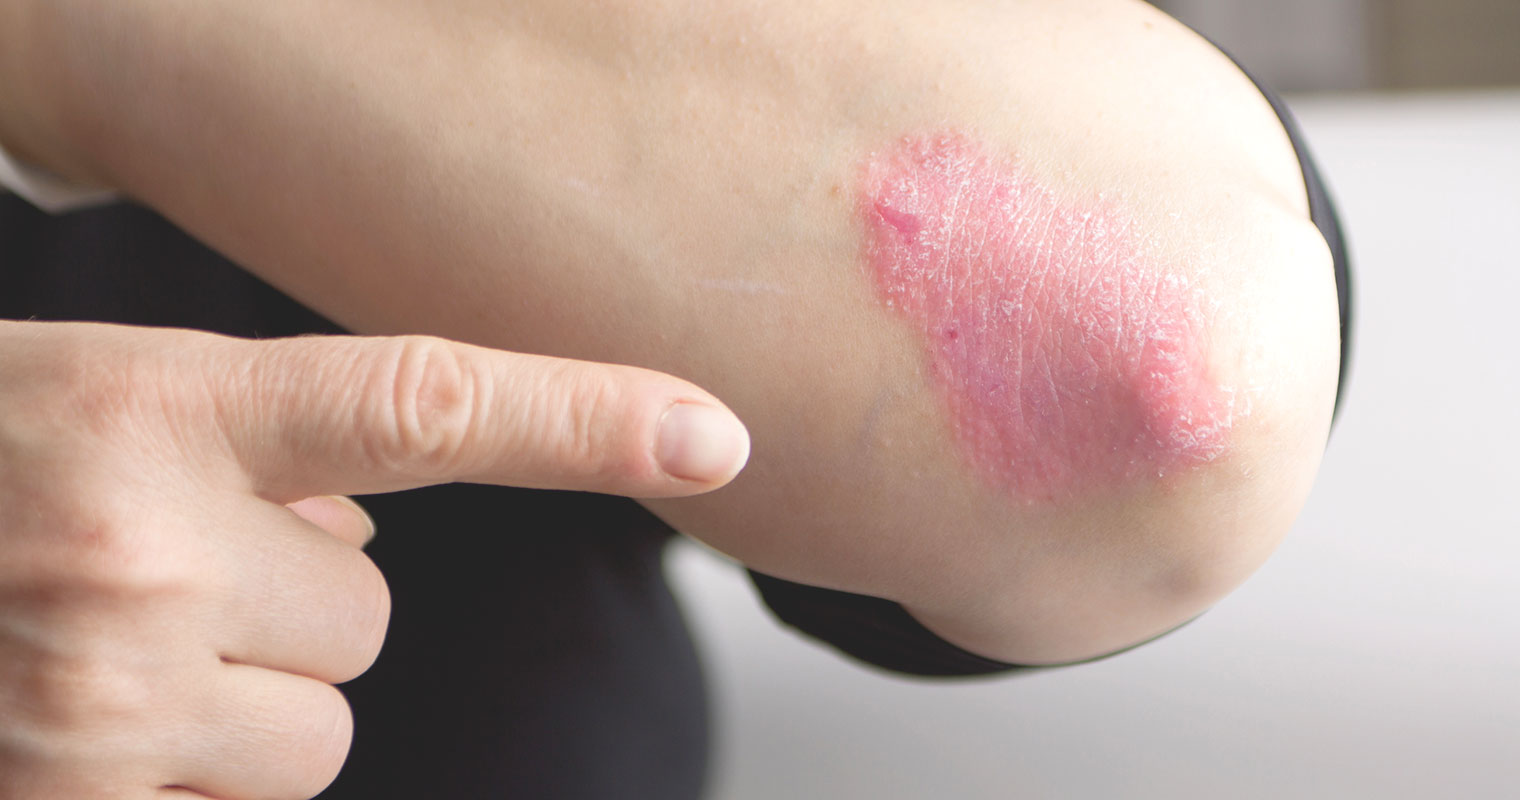 Eczema at the skin of elbow